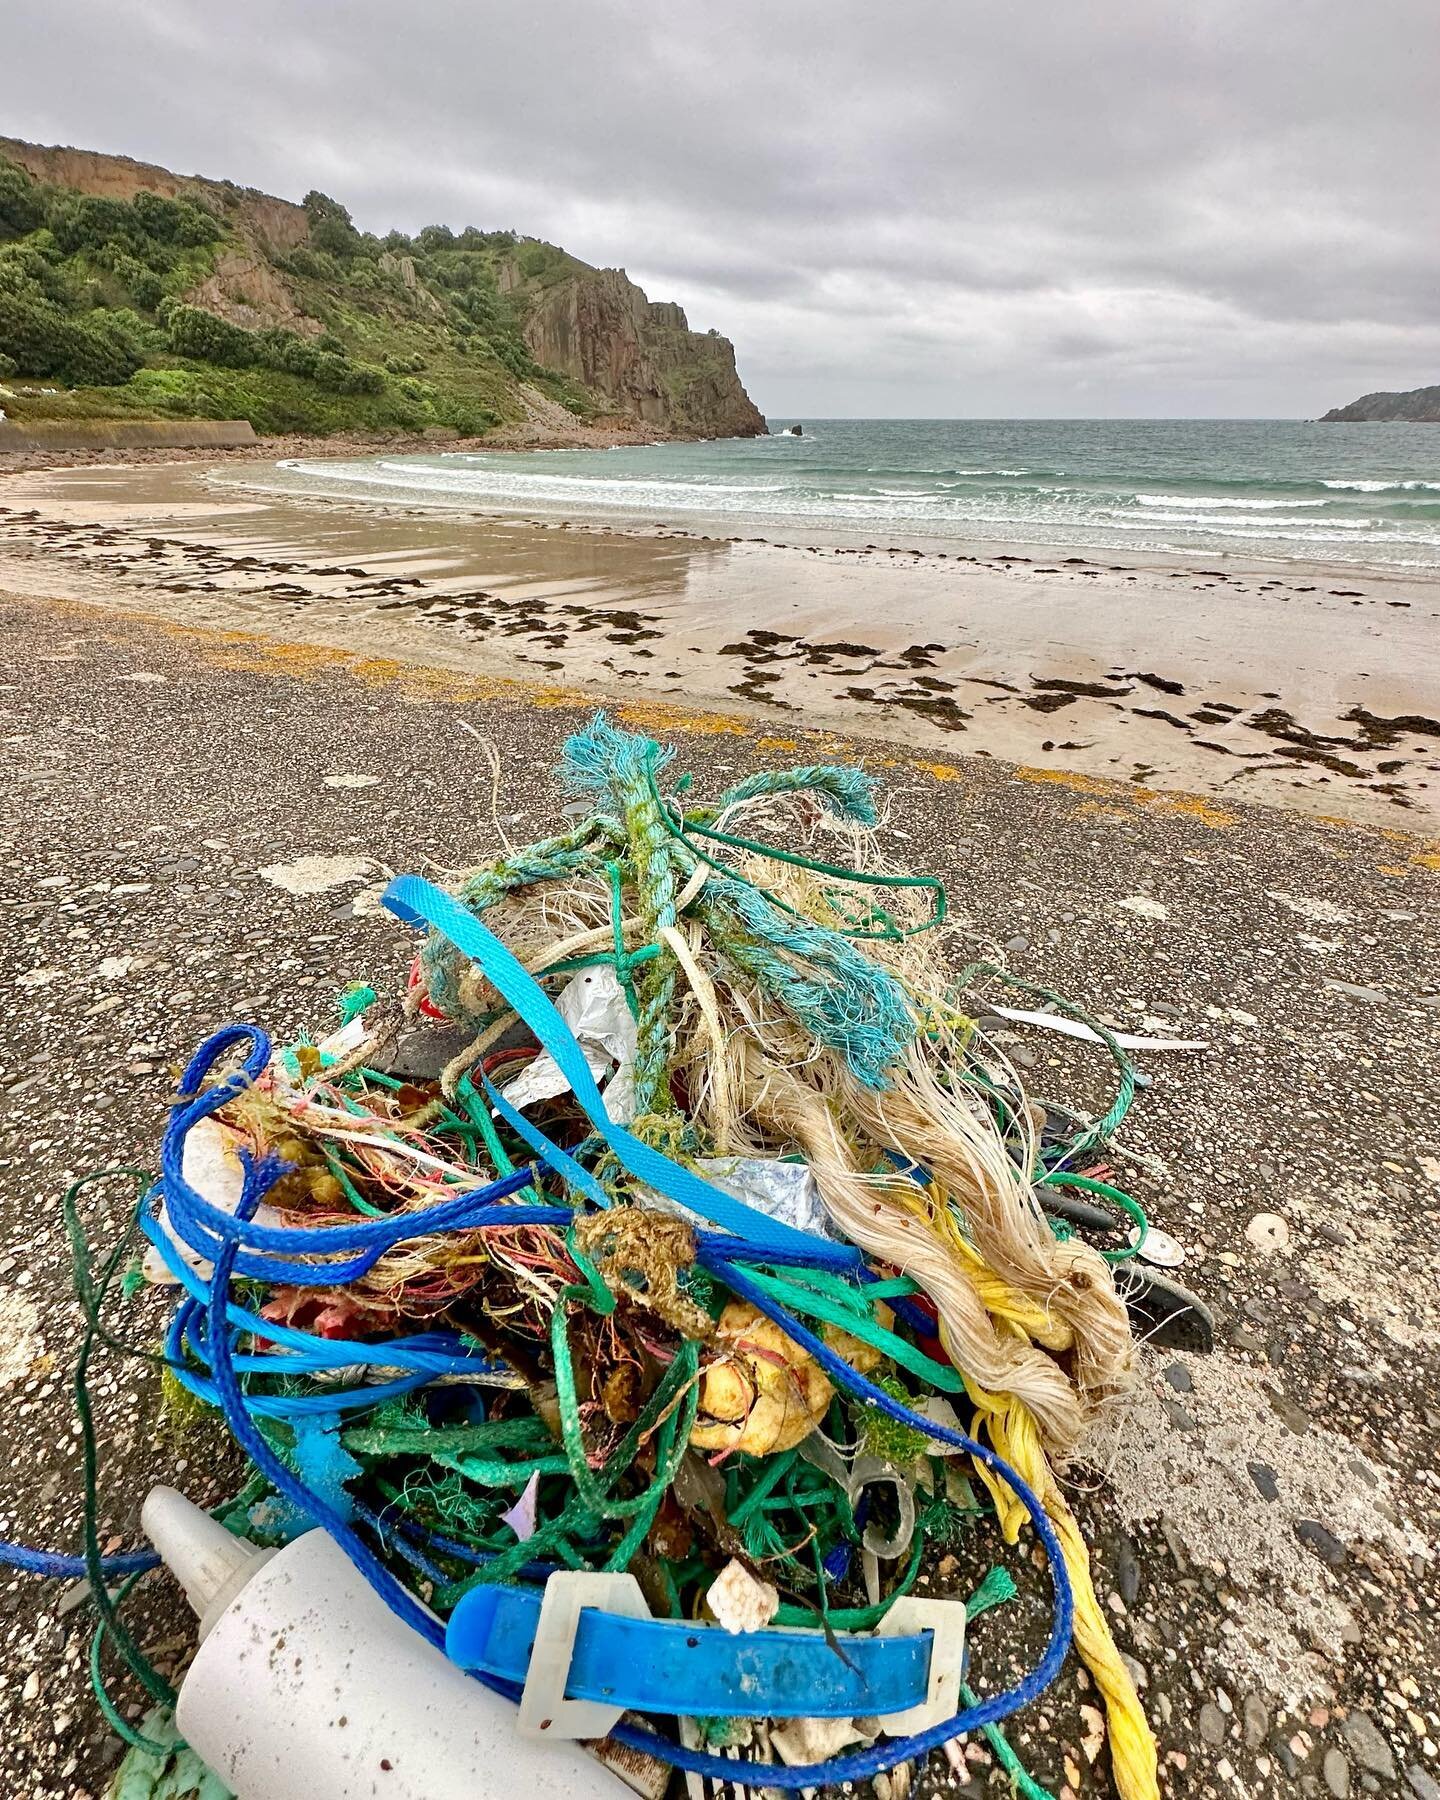 Thought I&rsquo;d get a long walk in with @woodyjersey before the weather turned.  We failed 😜

Ah well - such a lot of fishing rope in todays #2minutebeachclean along the tide line on the beach at Ouaisne.

Lot&rsquo;s more will be thrown up by the